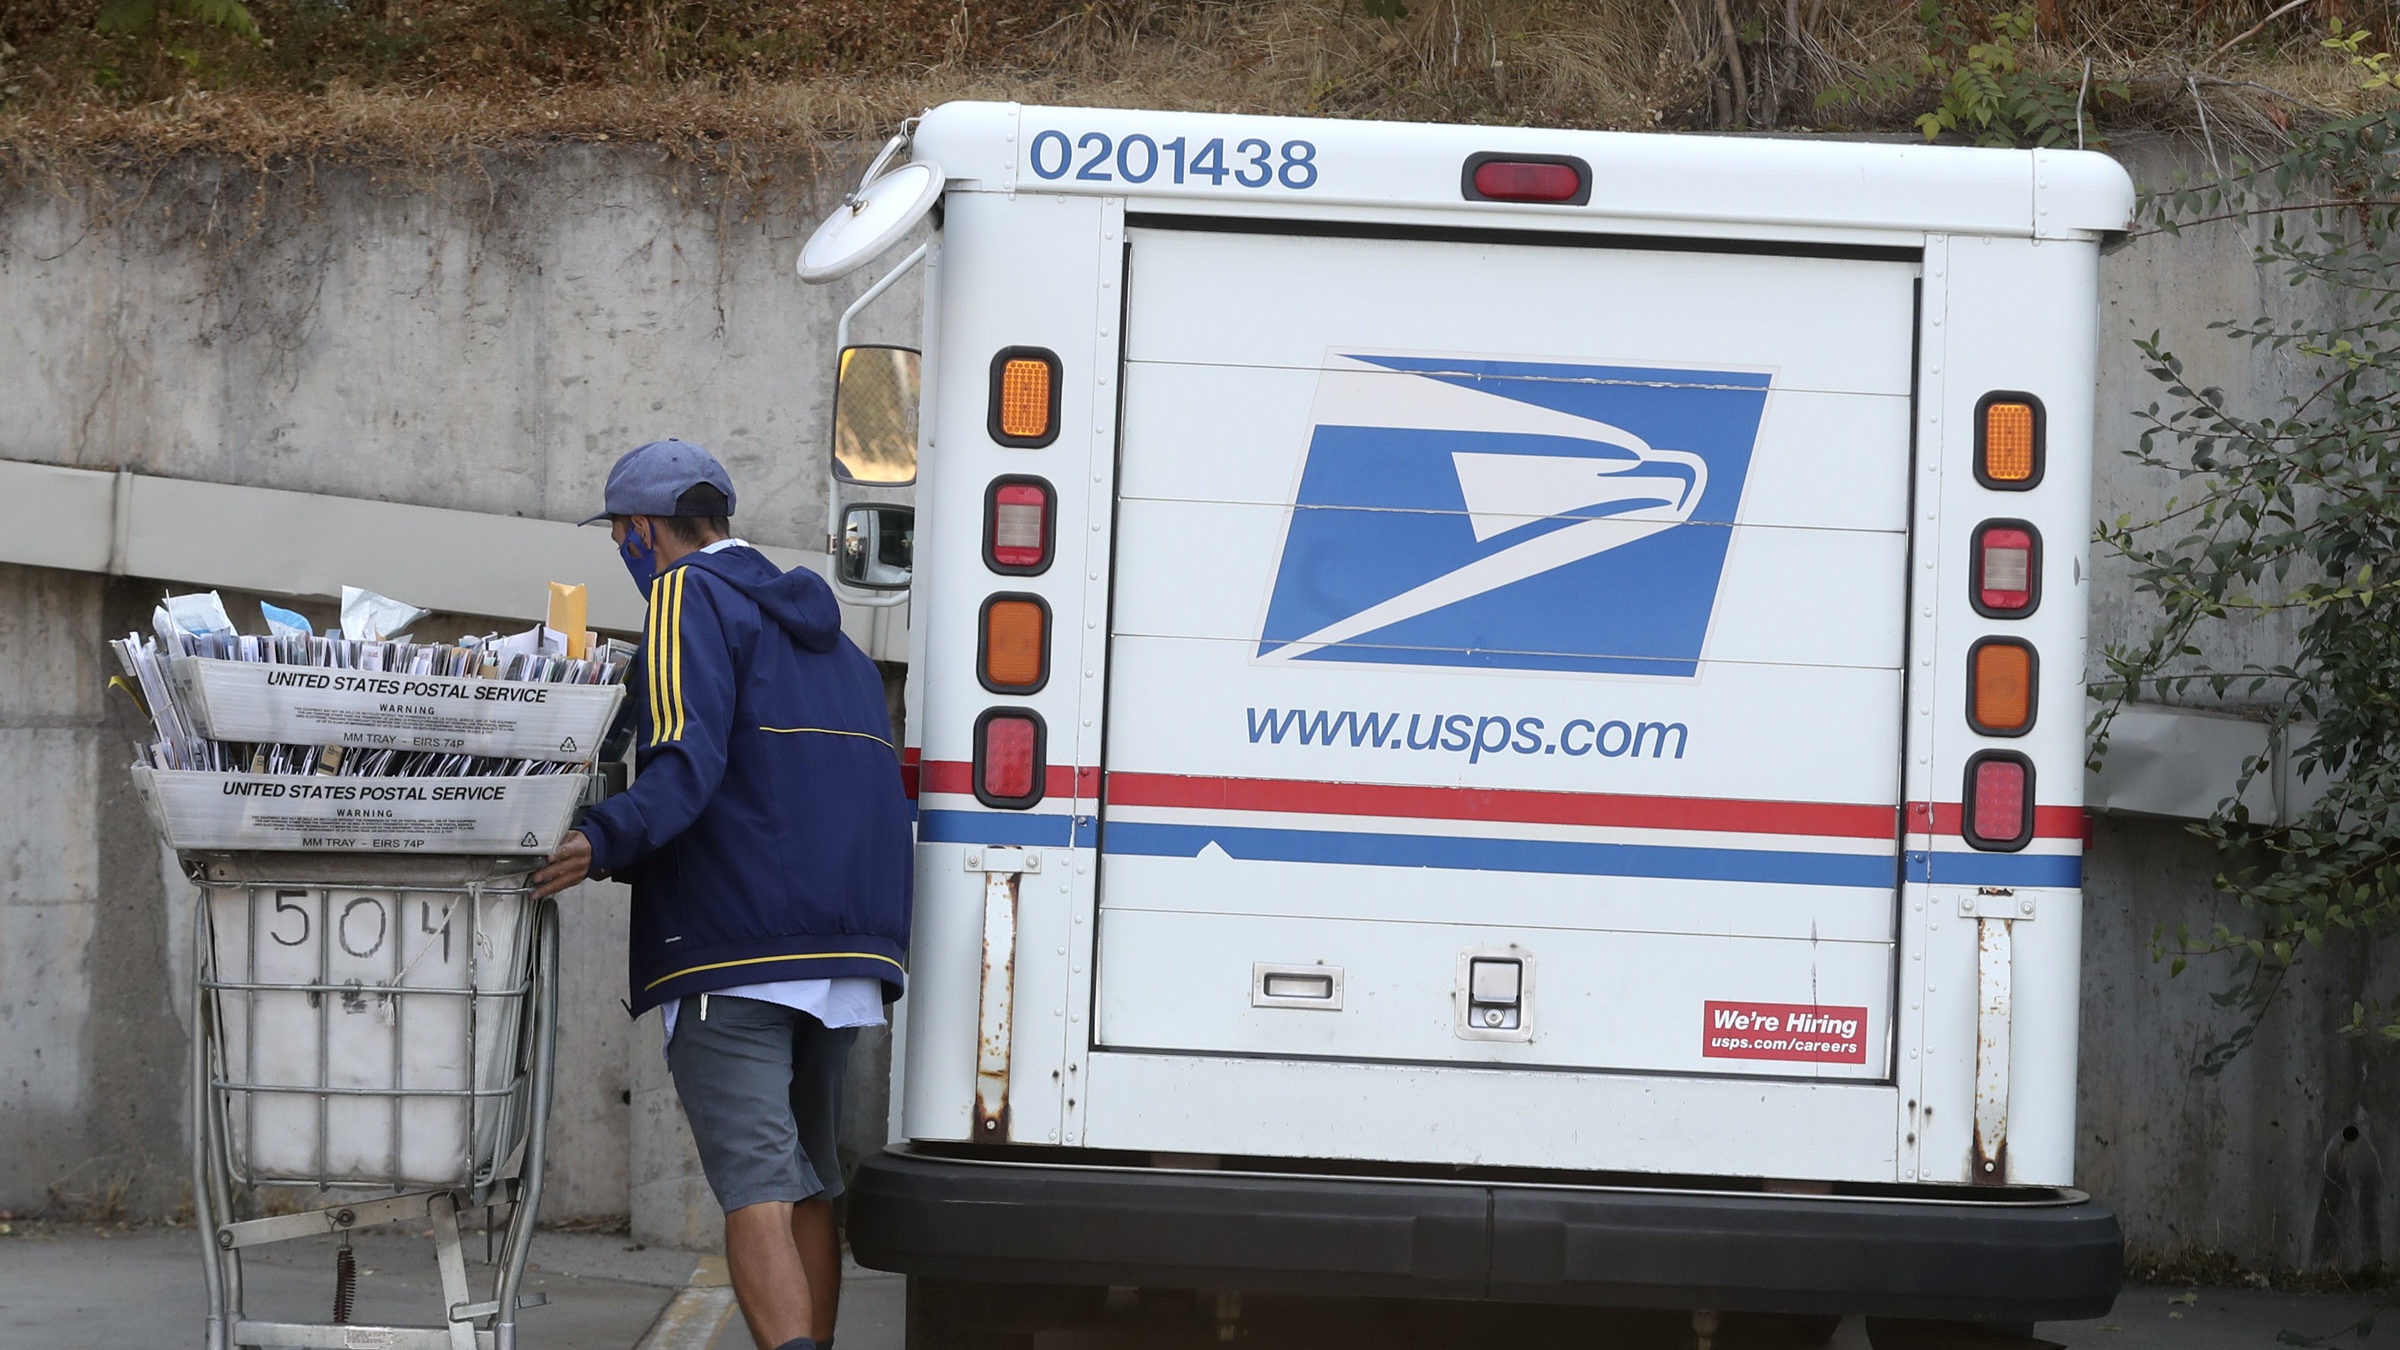 Carrier at USPS mail truck, USPS is holding a job fair...